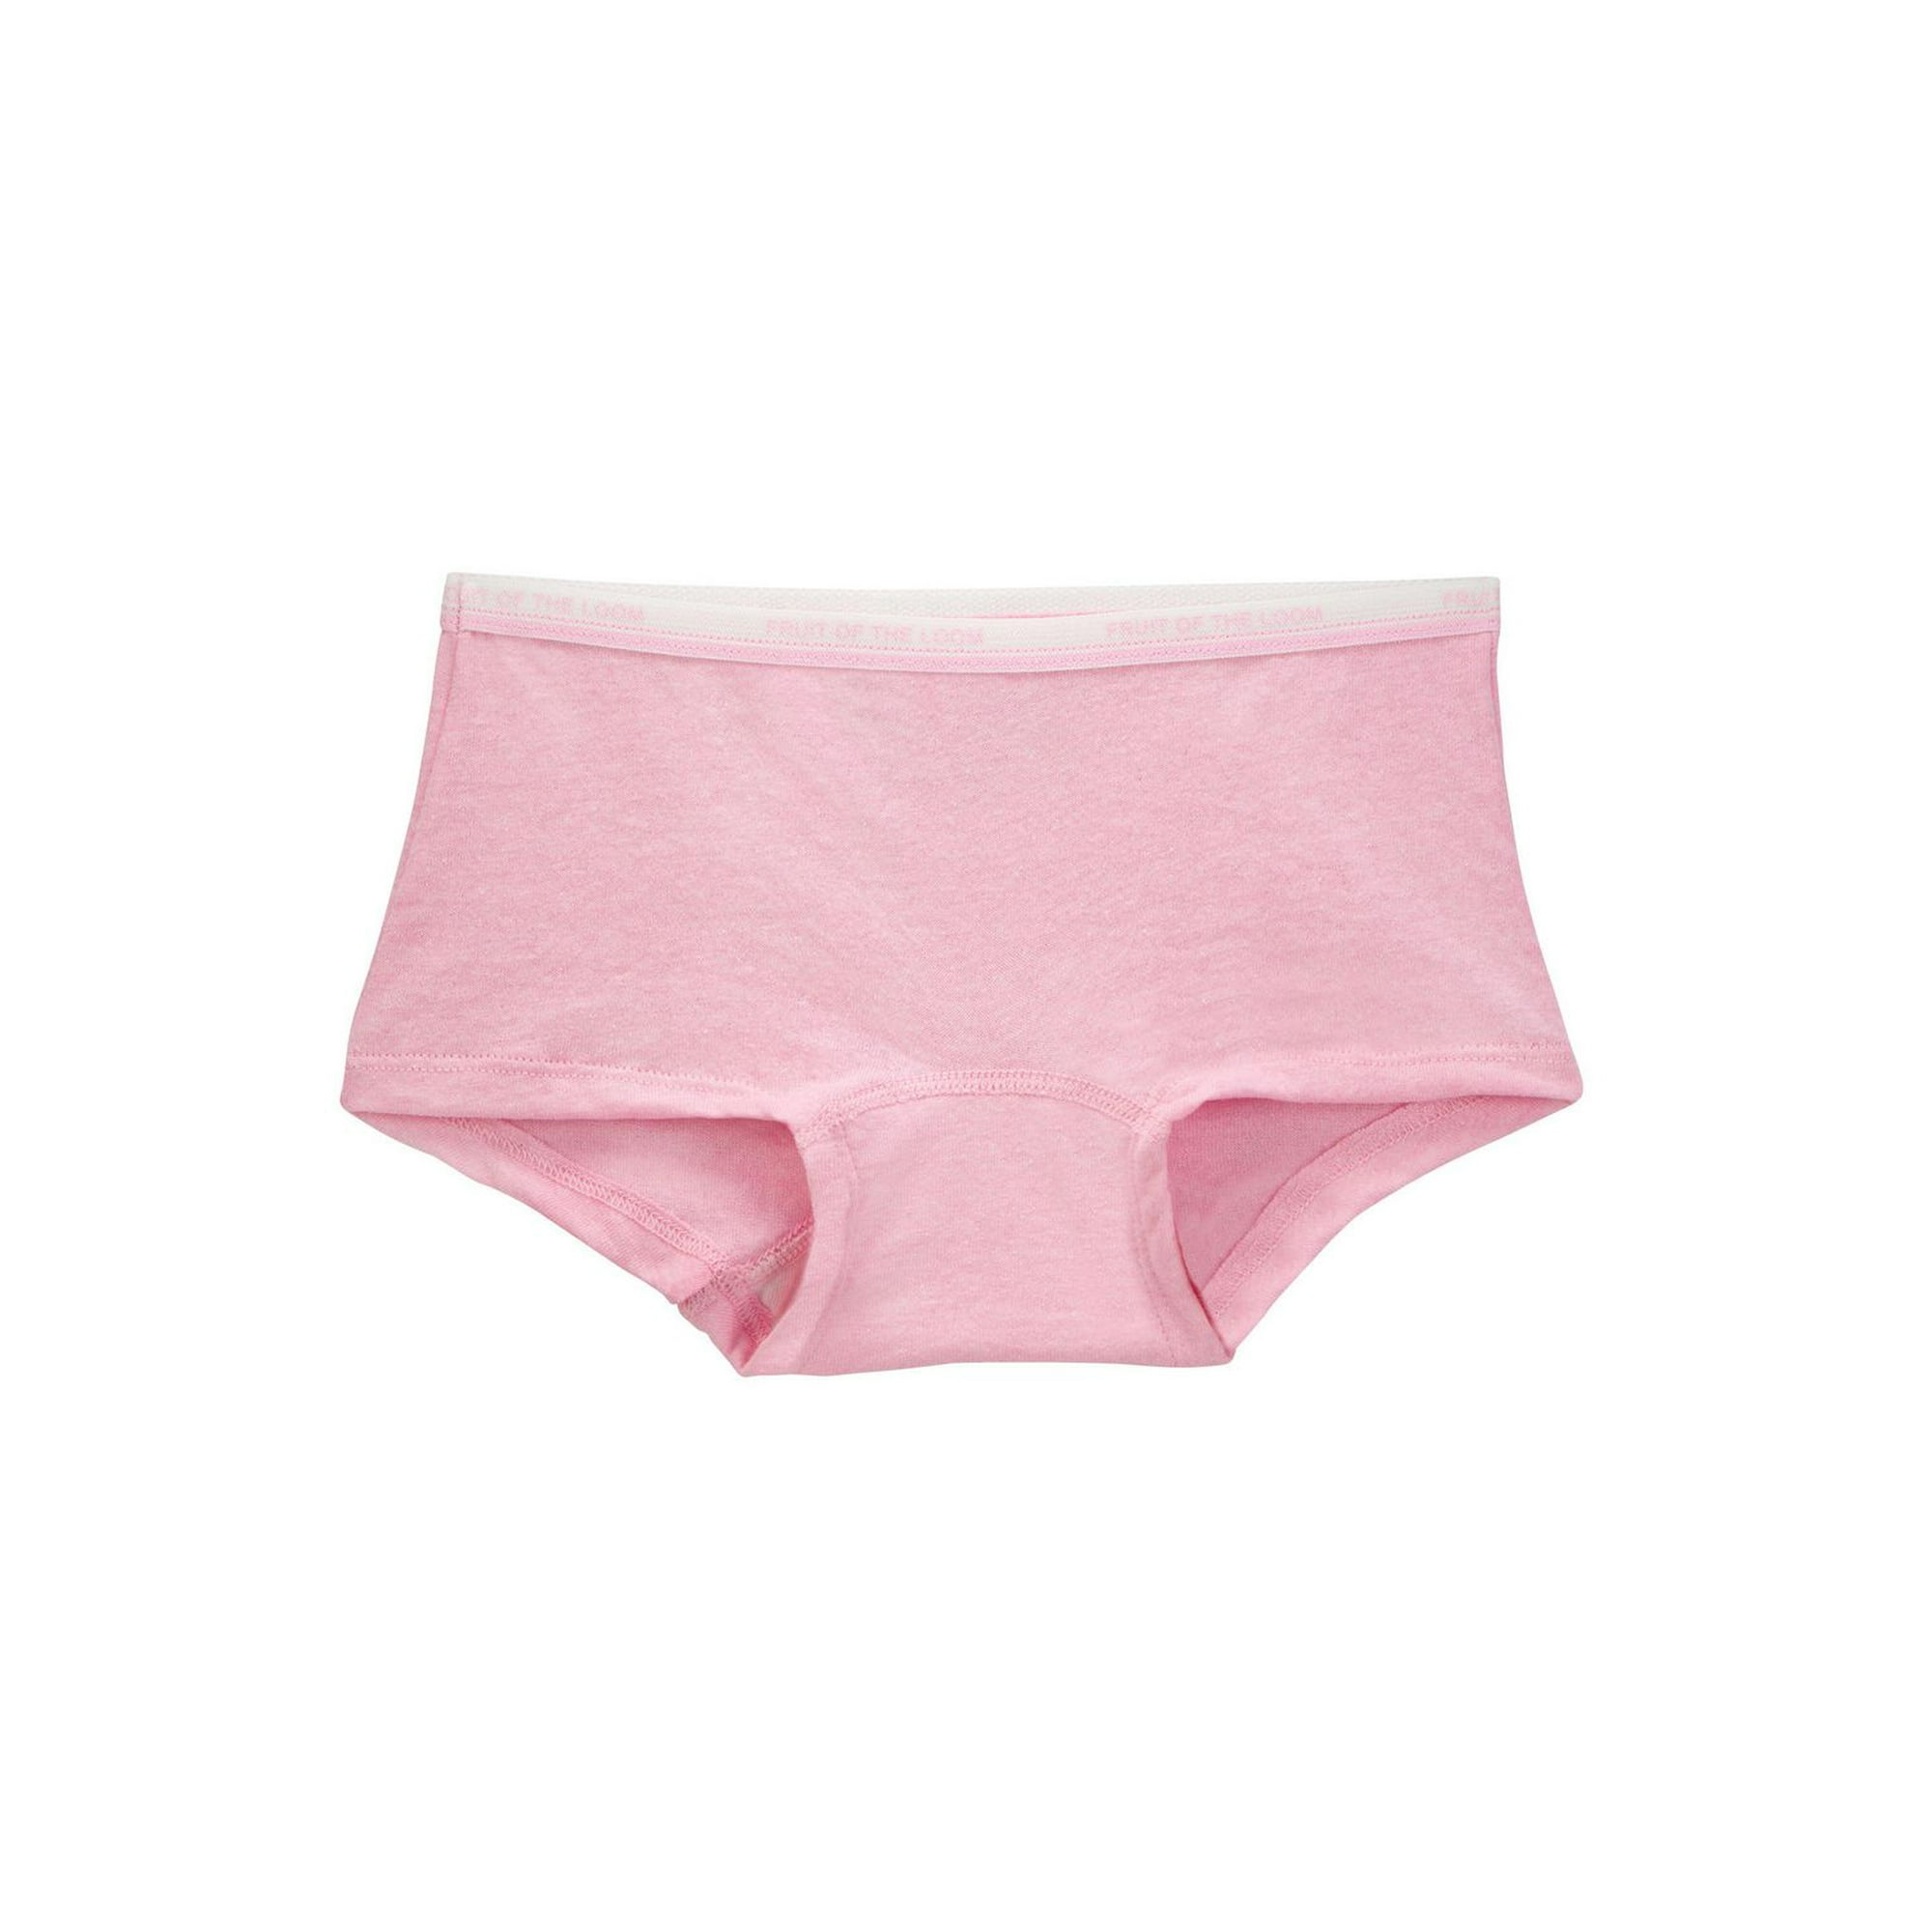 Fruit of the Loom Girls' Toddler Flexible Fit Brief, SIZE 2T/3T